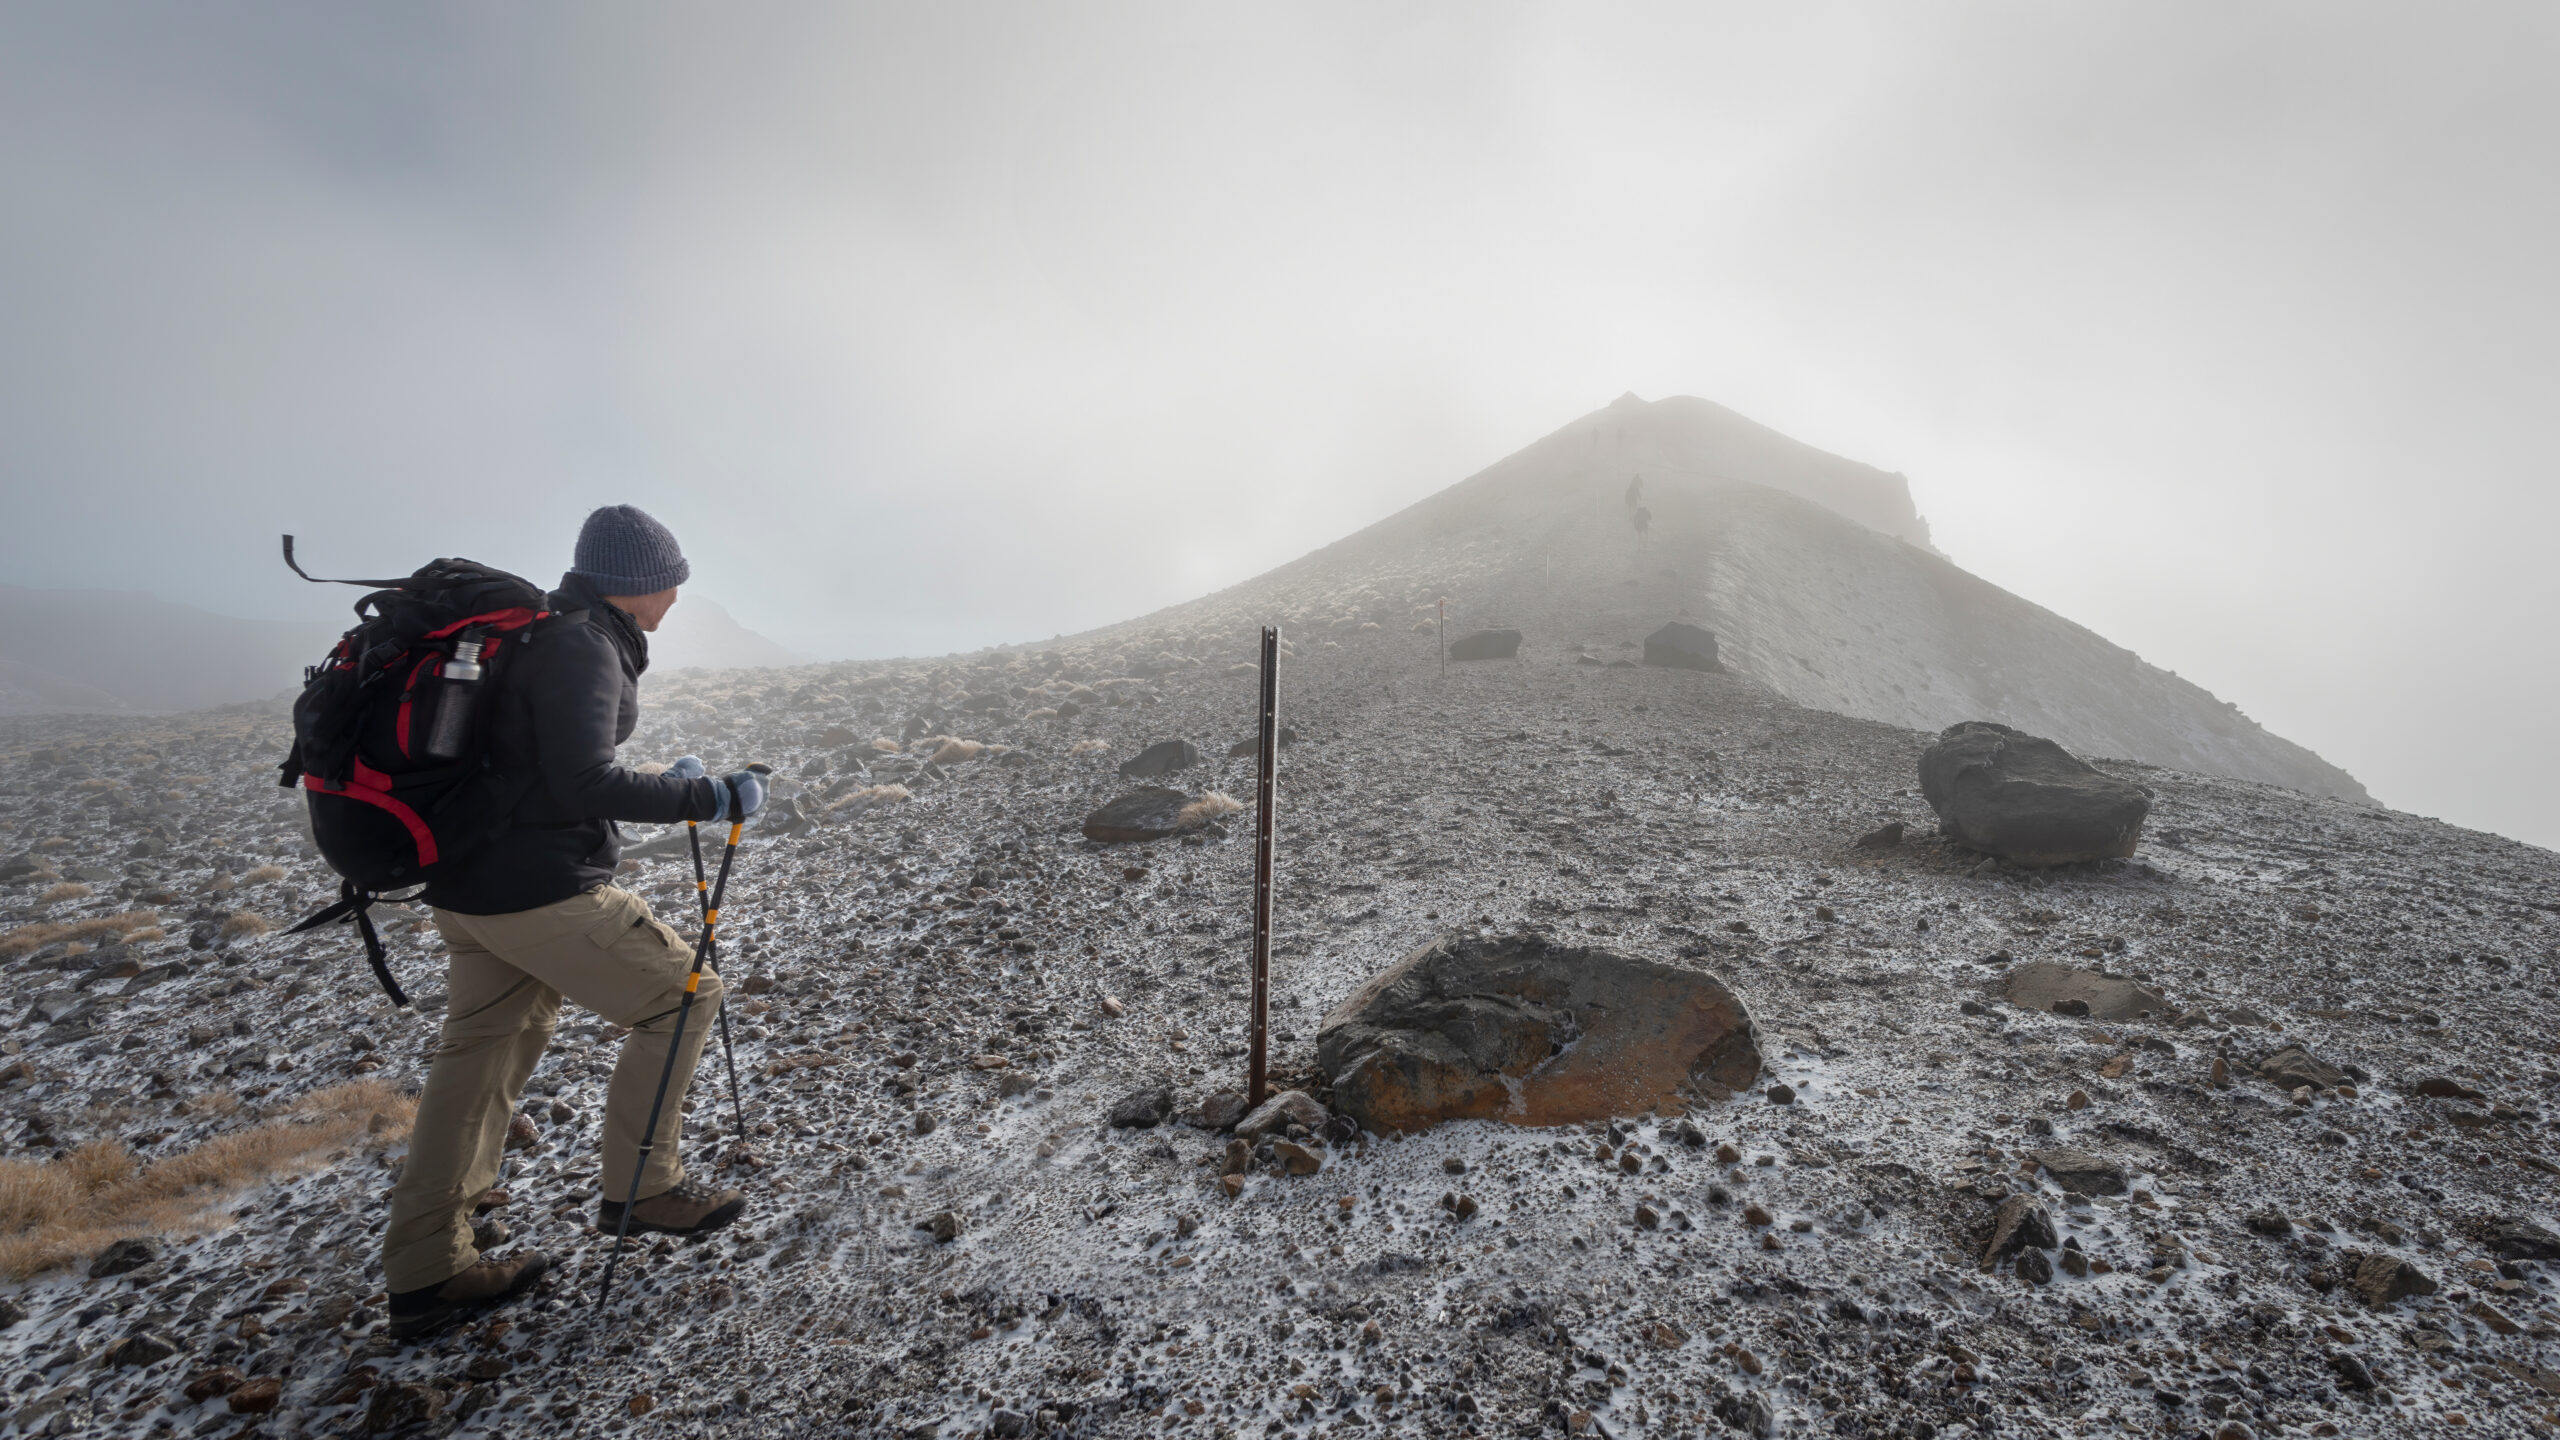 Hiking The Steep Scree Terrain To The Red Crater Summit With Strong Southerly Wind On Tongariro Alpine Crossing. New Zealand.